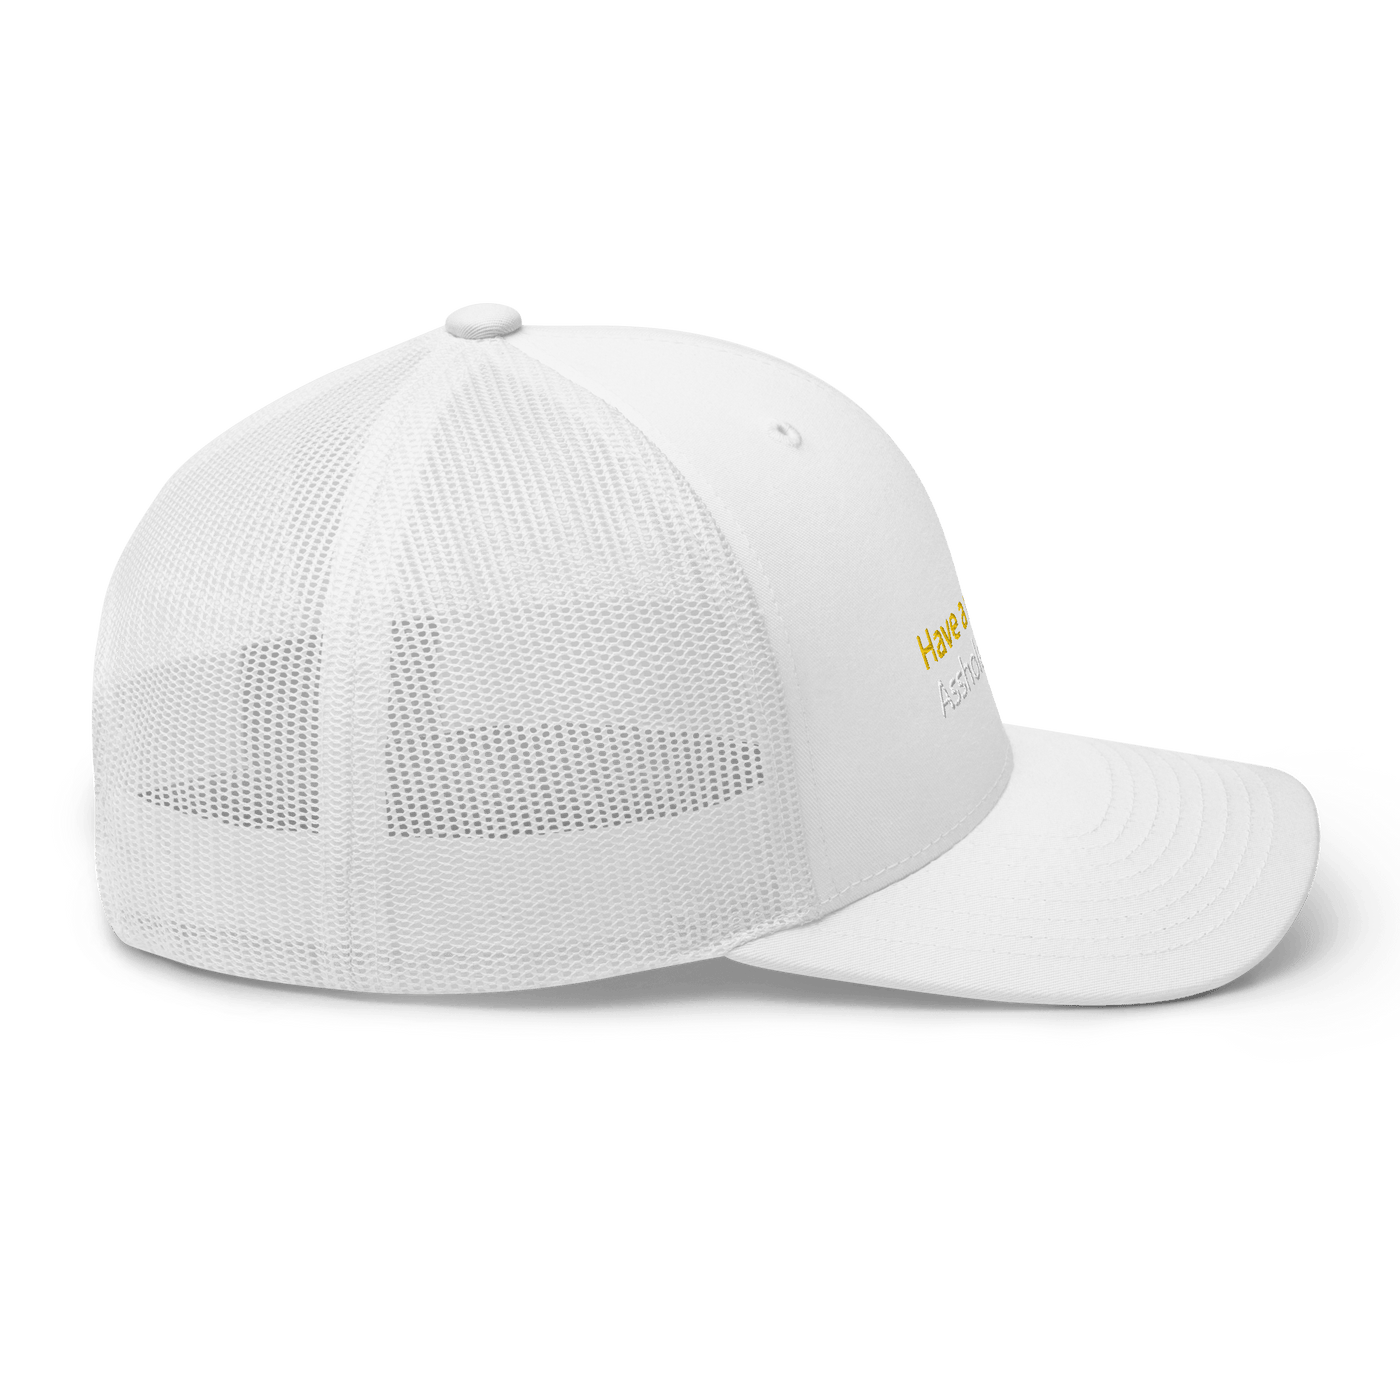 Have a nice day! (asshole) Trucker Cap - White - - Just Another Cap Store